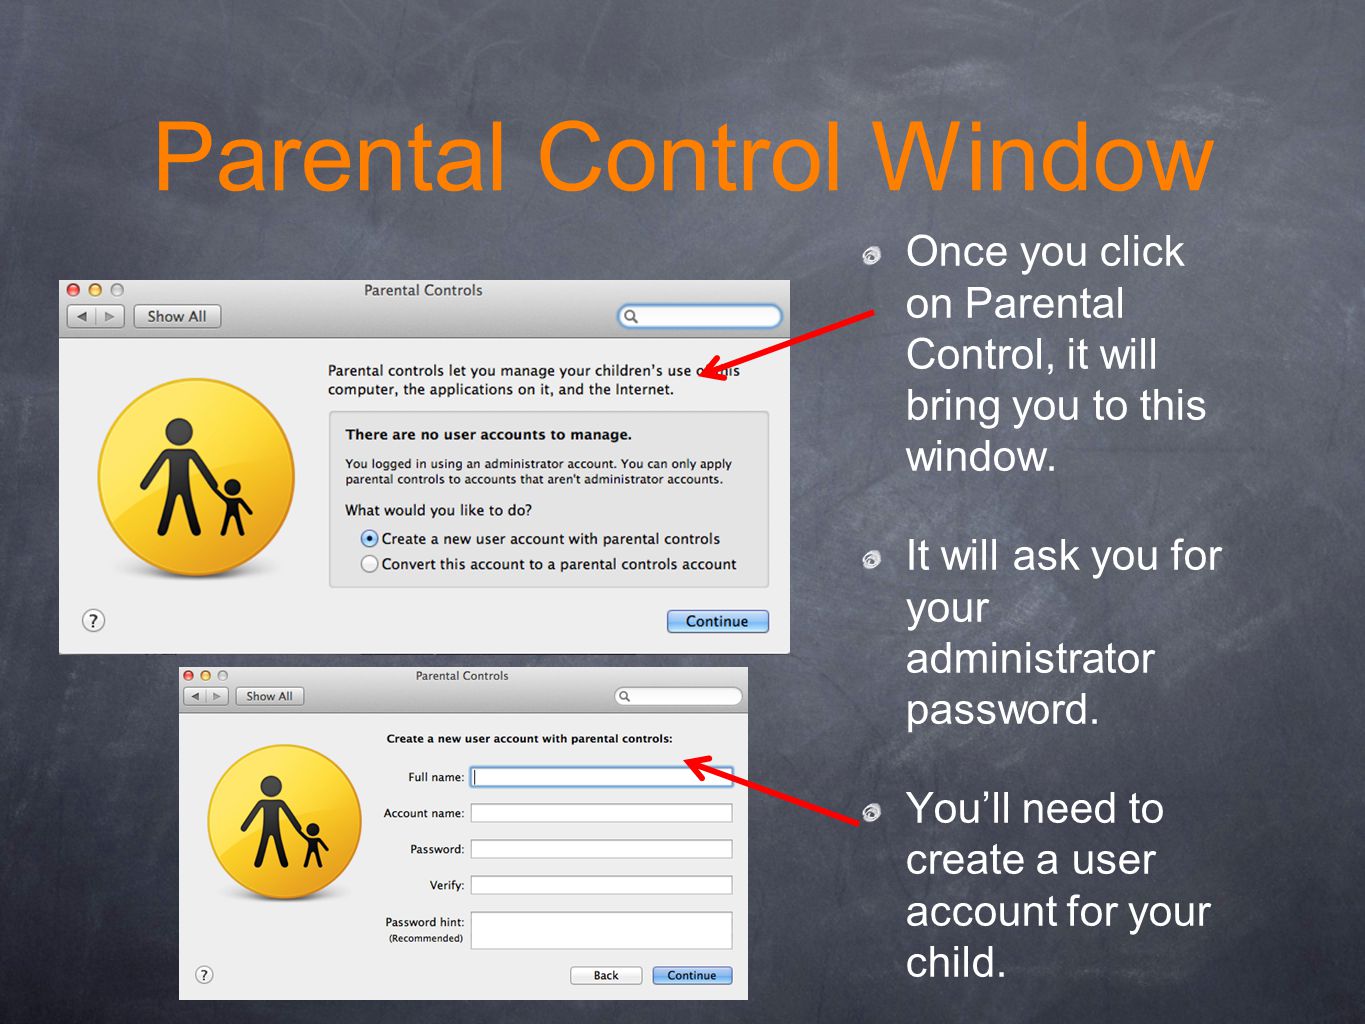 Parental Control Window Once you click on Parental Control, it will bring you to this window.